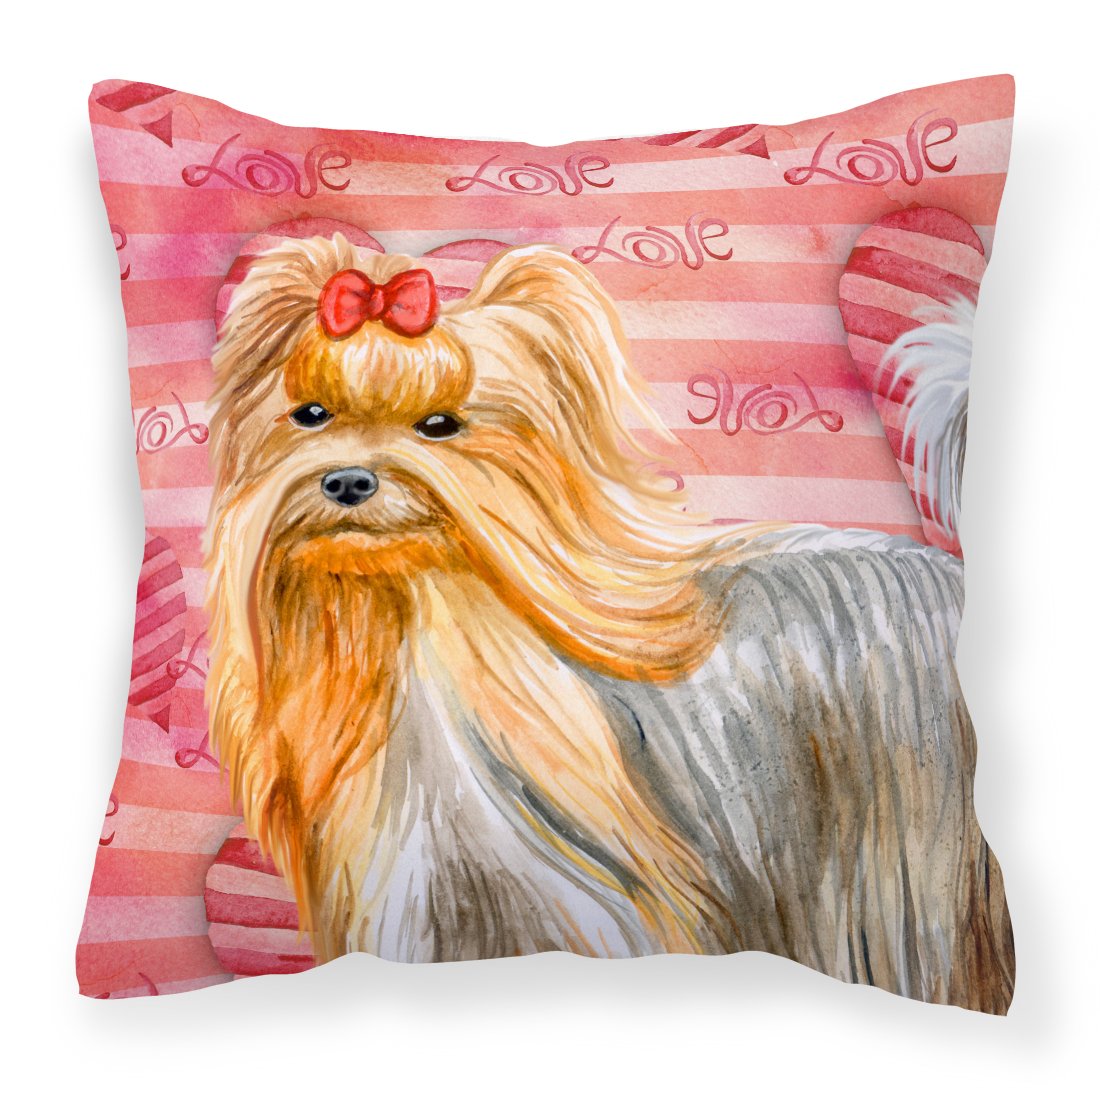 Yorkshire Terrier Love Fabric Decorative Pillow BB9772PW1818 by Caroline's Treasures